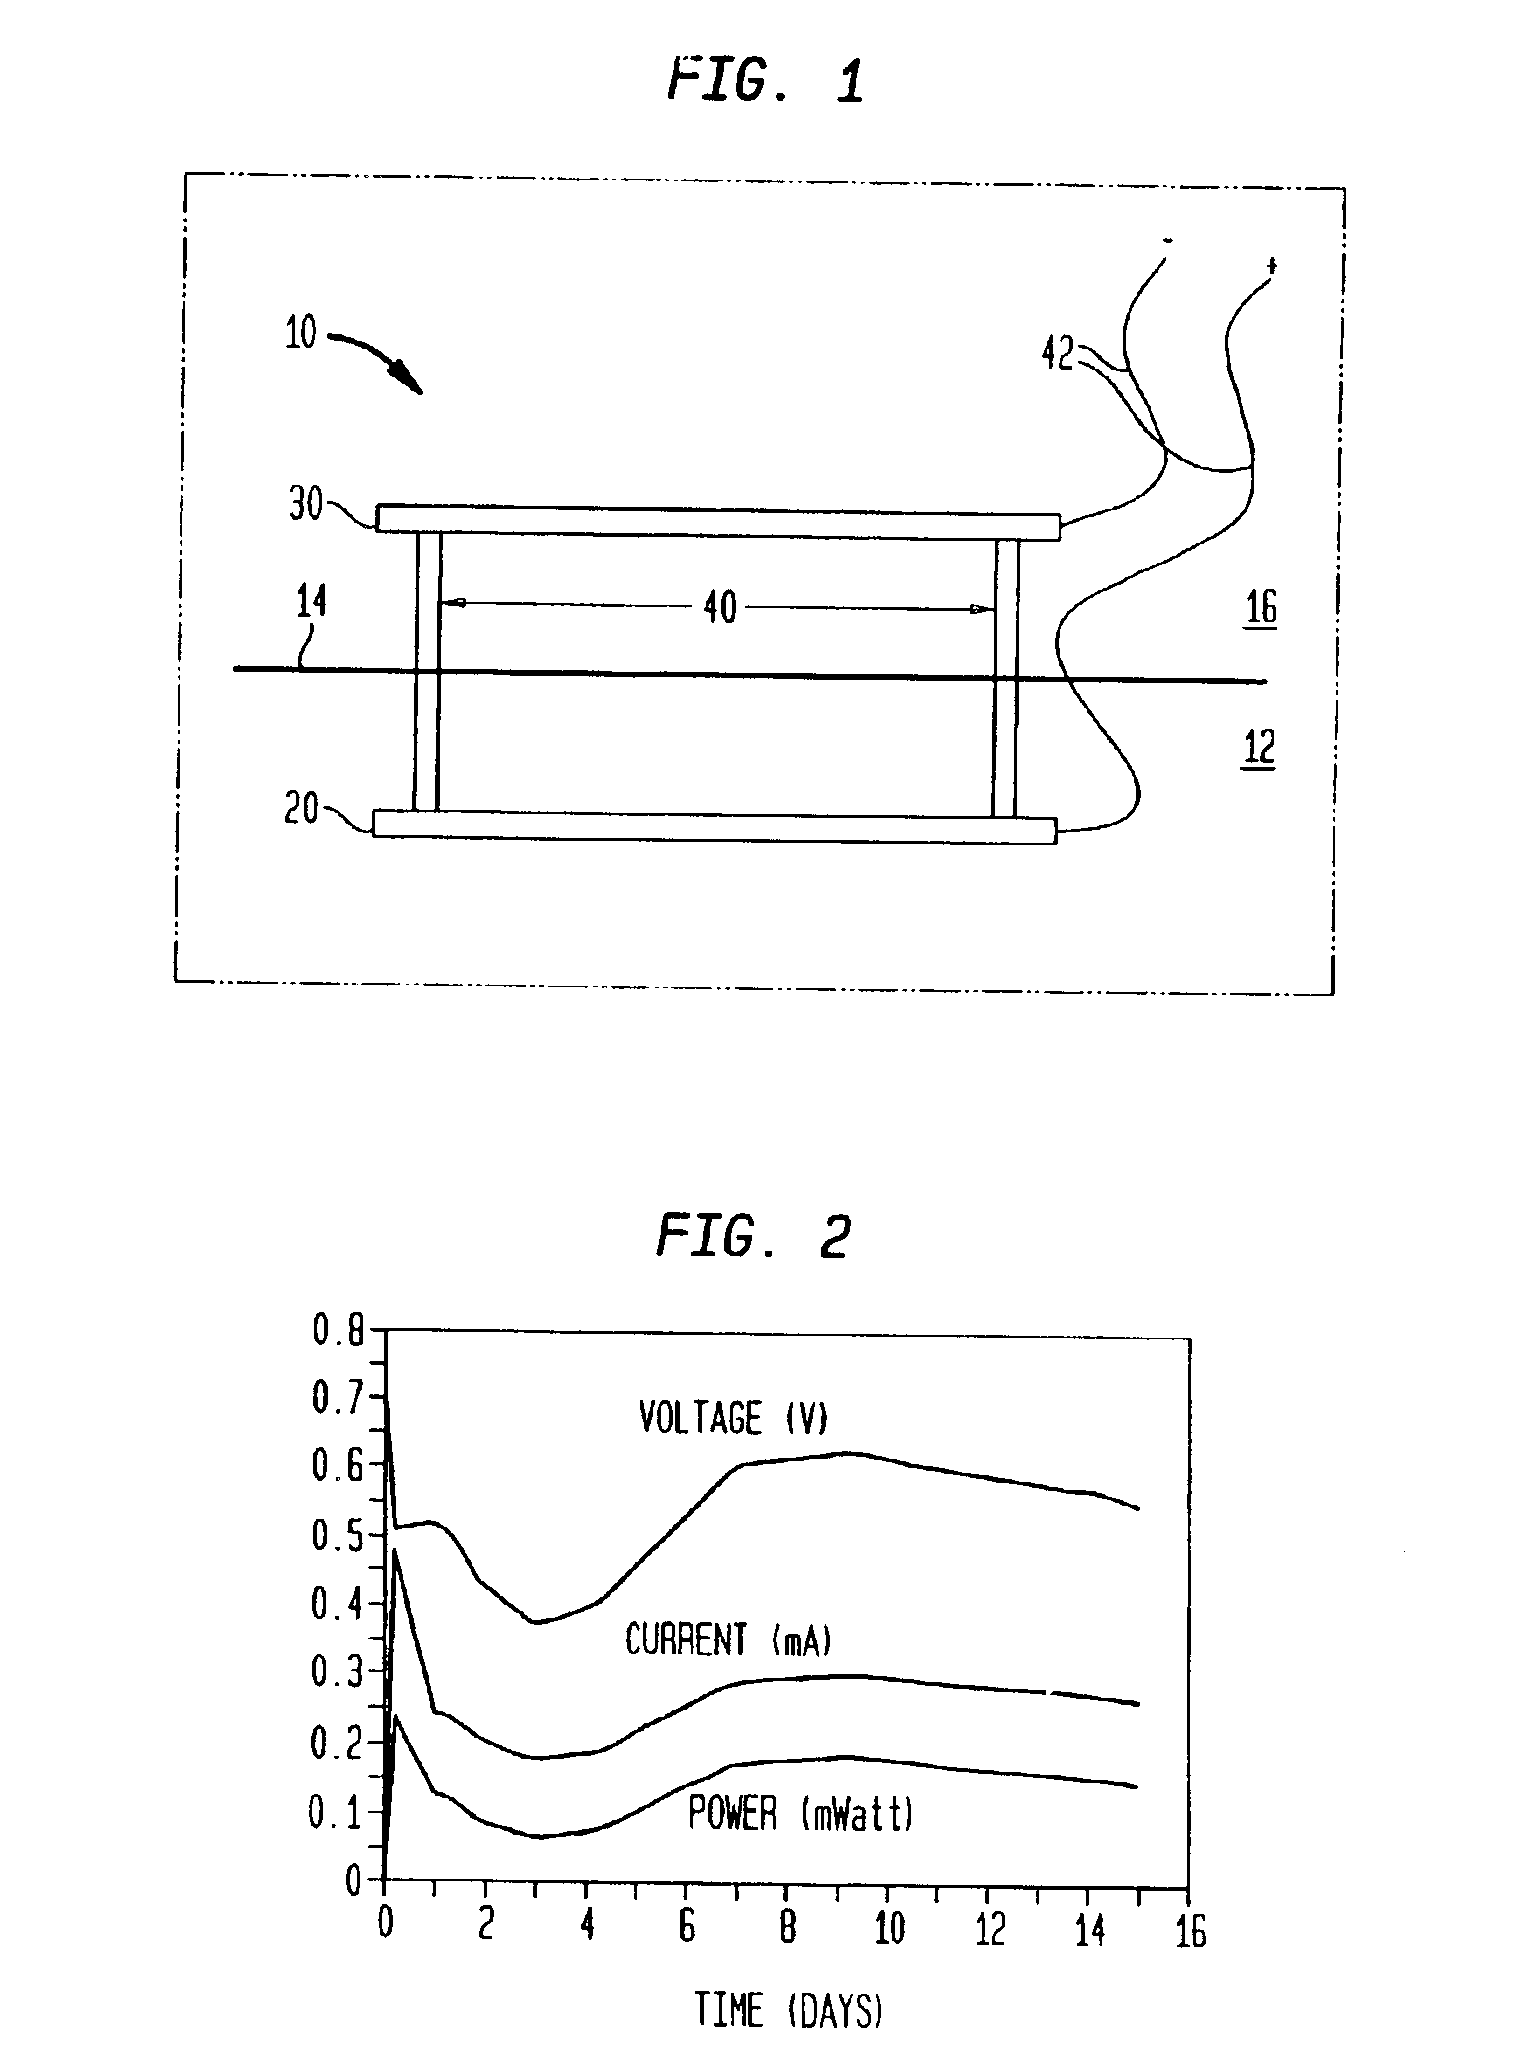 Method and apparatus for generating power from voltage gradients at sediment-water interfaces